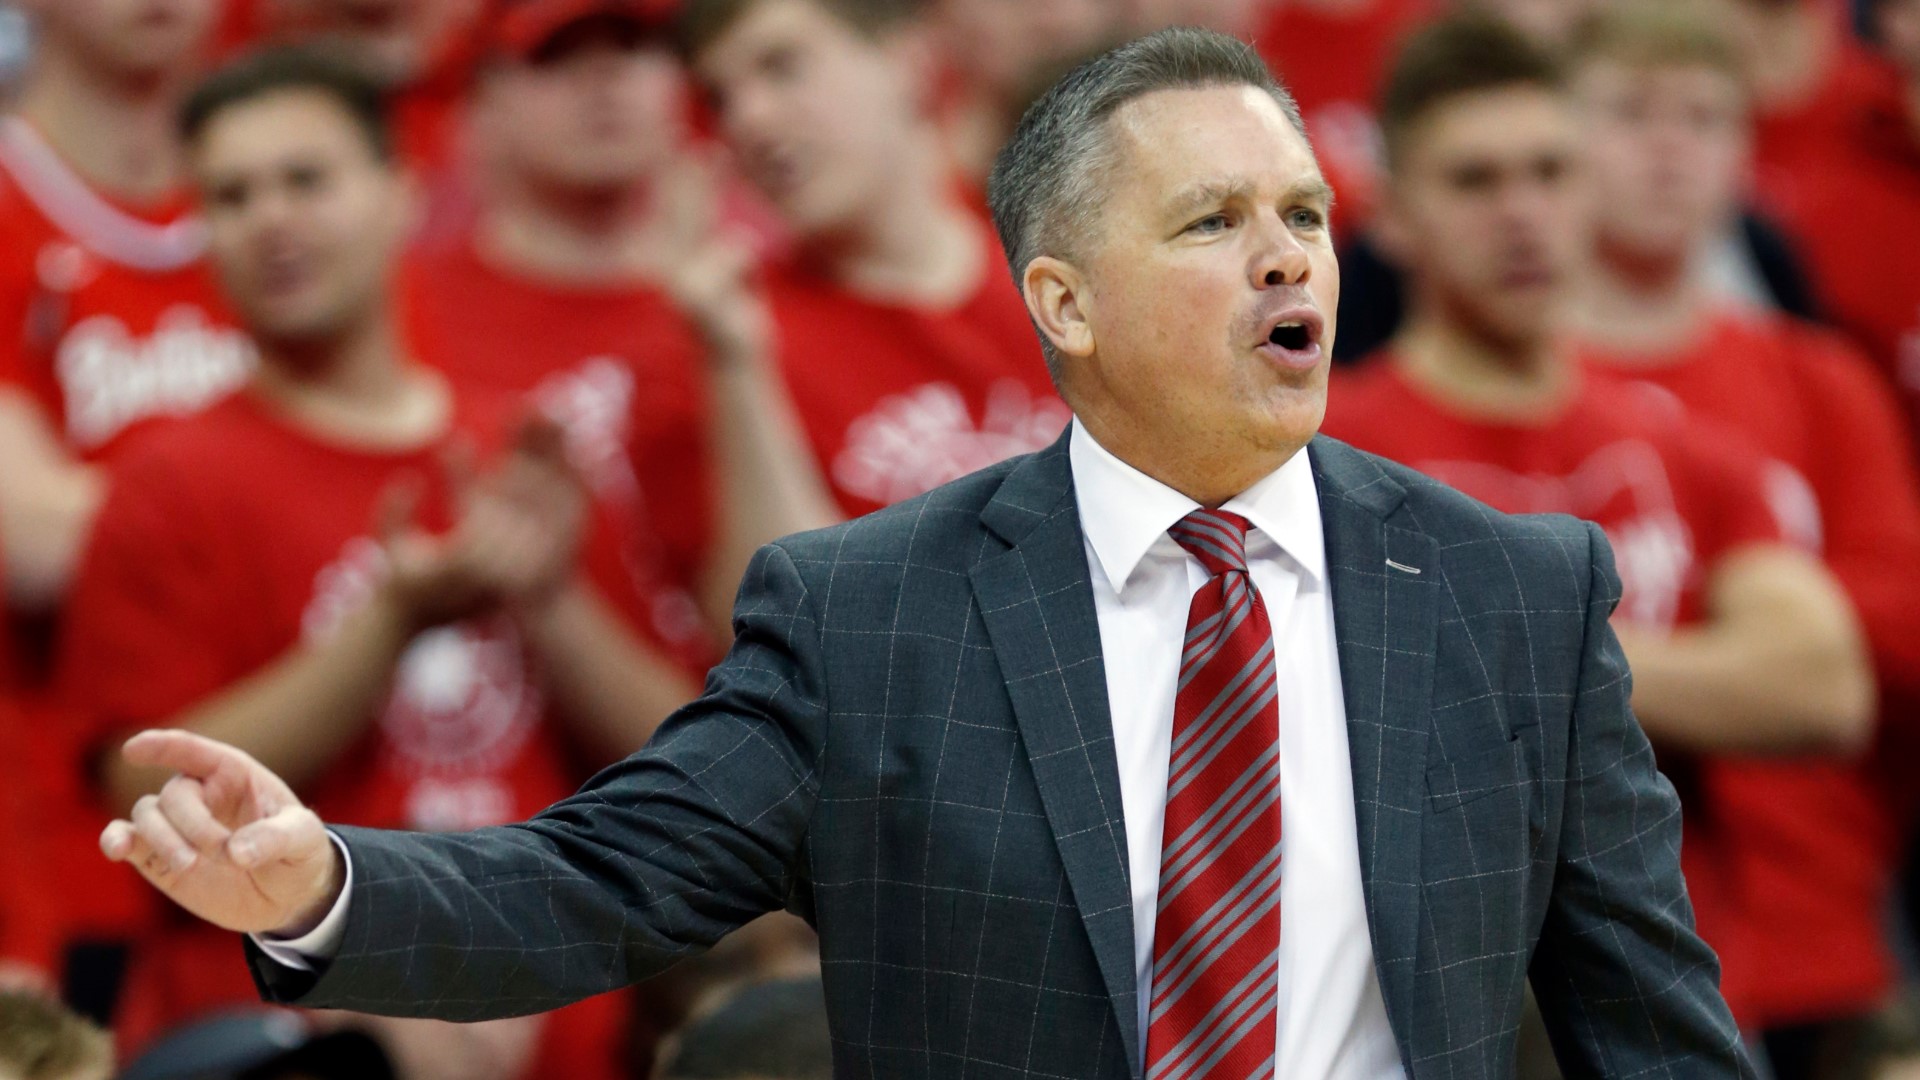 Chris Holtmann's termination comes two years after Holtmann's contract was extended through the 2027-28 season.